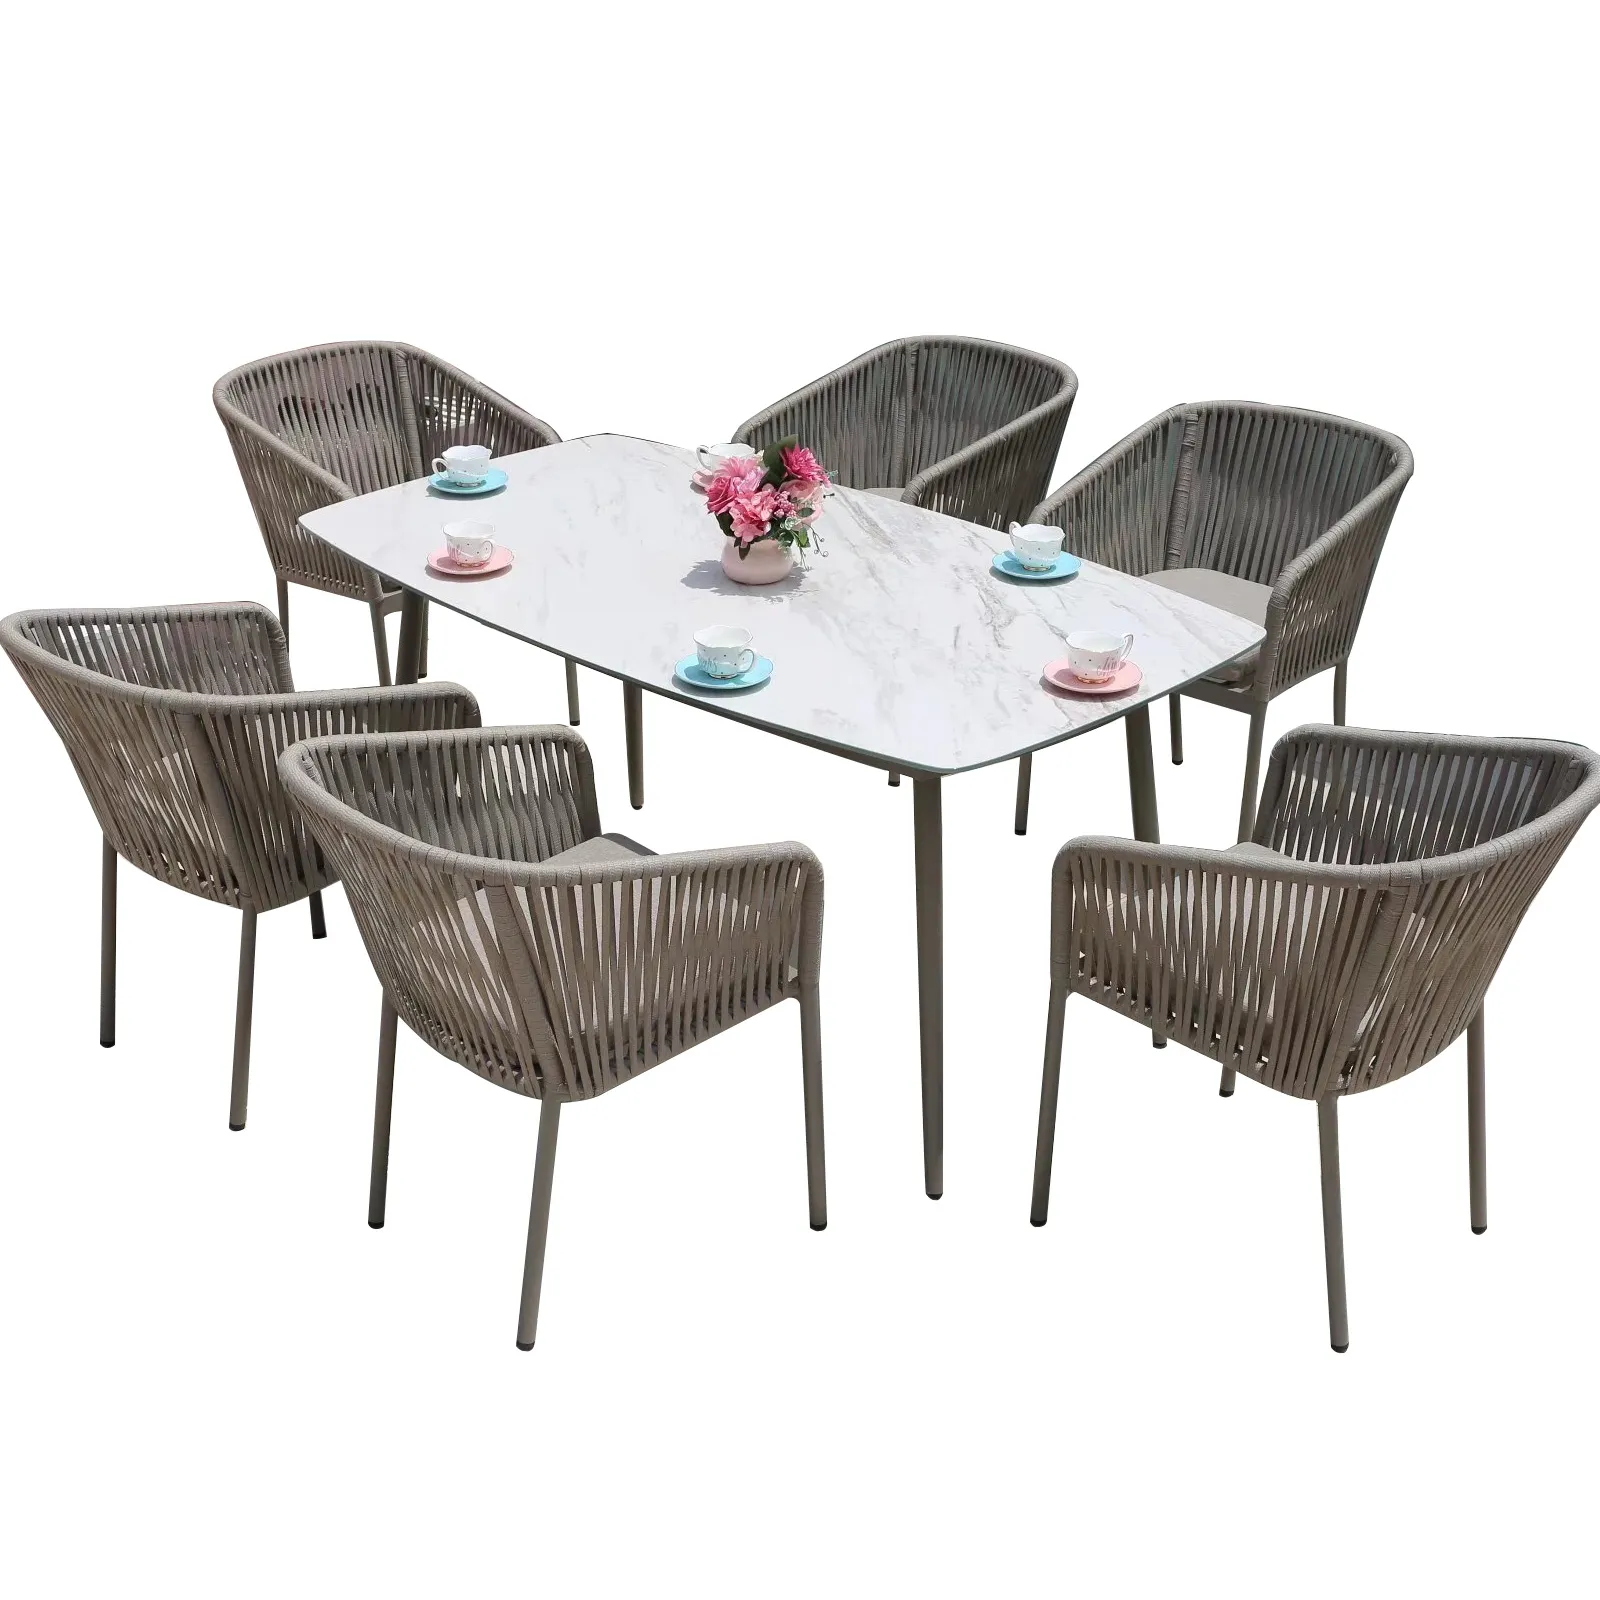 Factory direct supply 7-piece wicker chair glass table outdoor furniture garden set